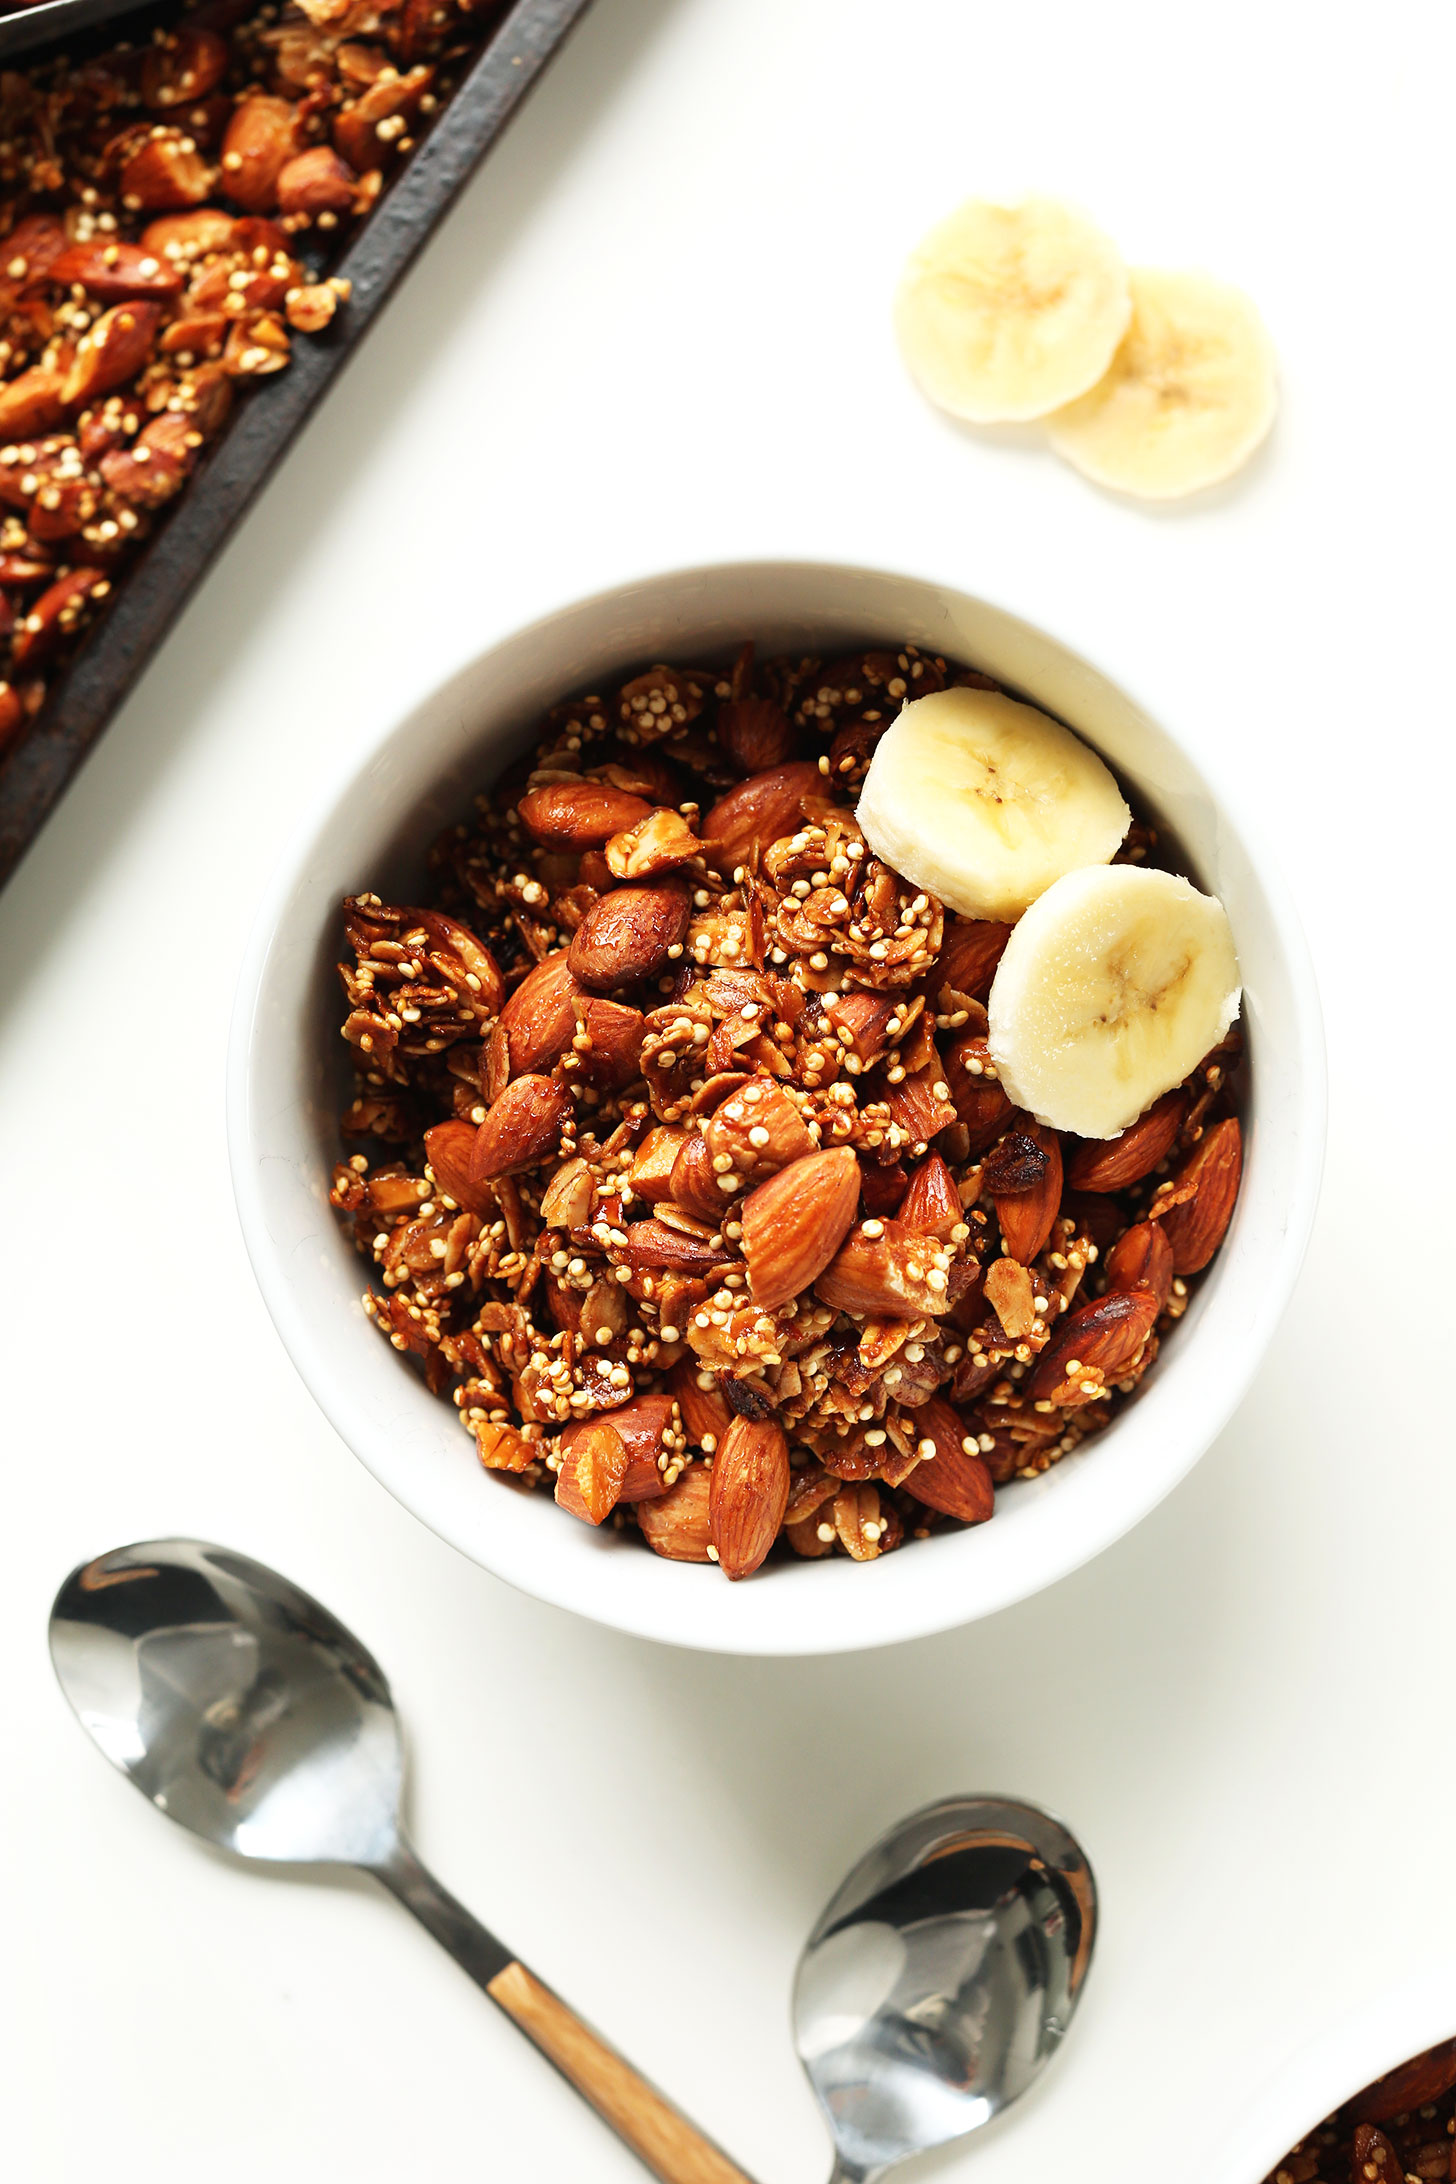 Bowl of our delicious homemade Quinoa Granola with Oats & Almonds